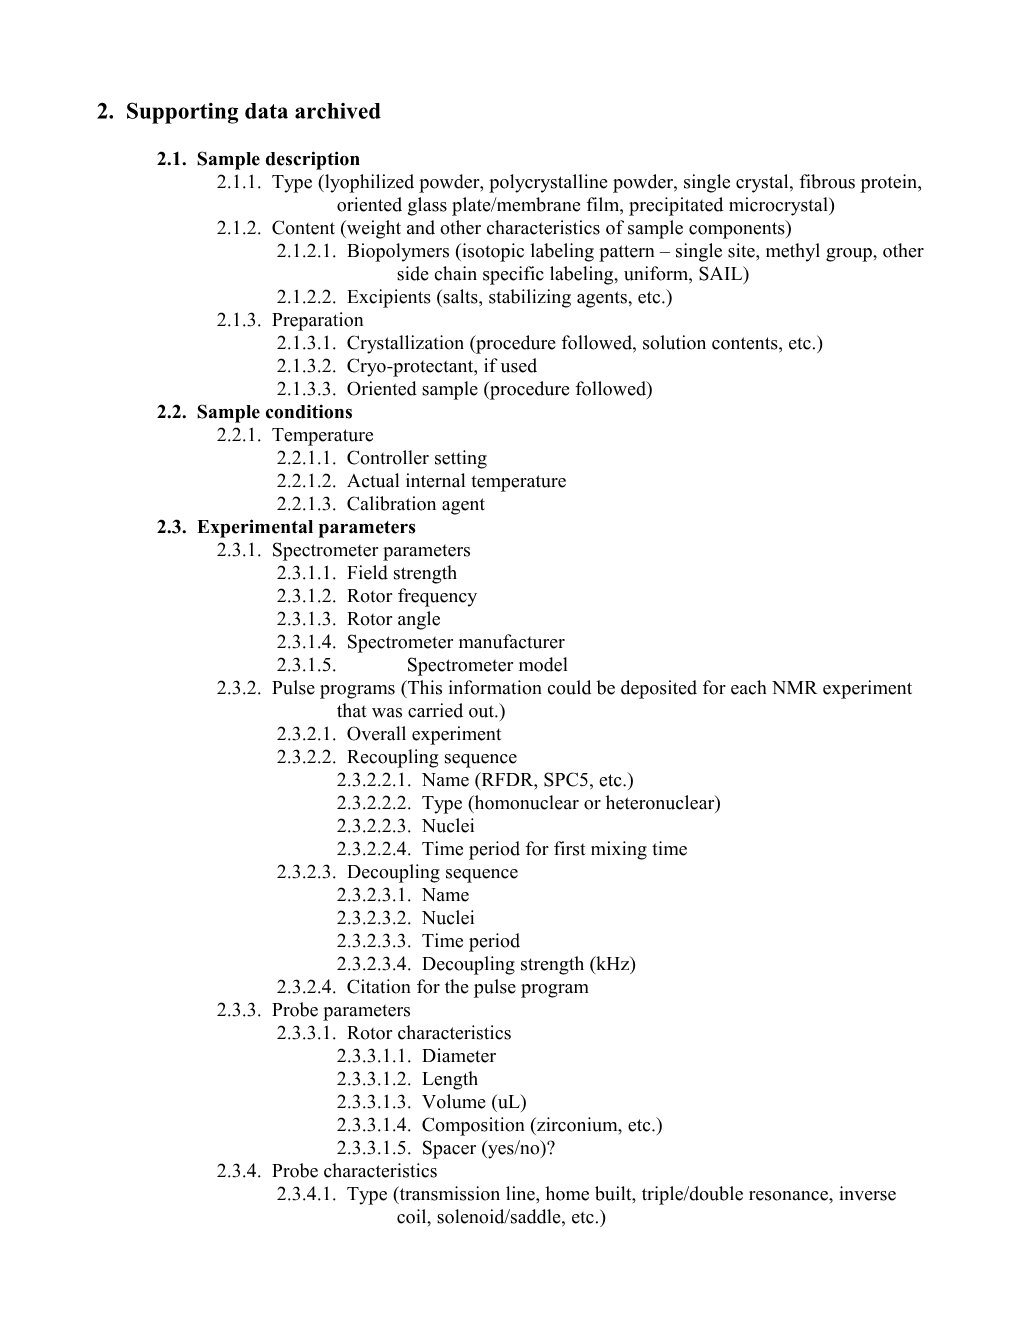 Solid-State NMR BMRB Deposition Content Draft Specification